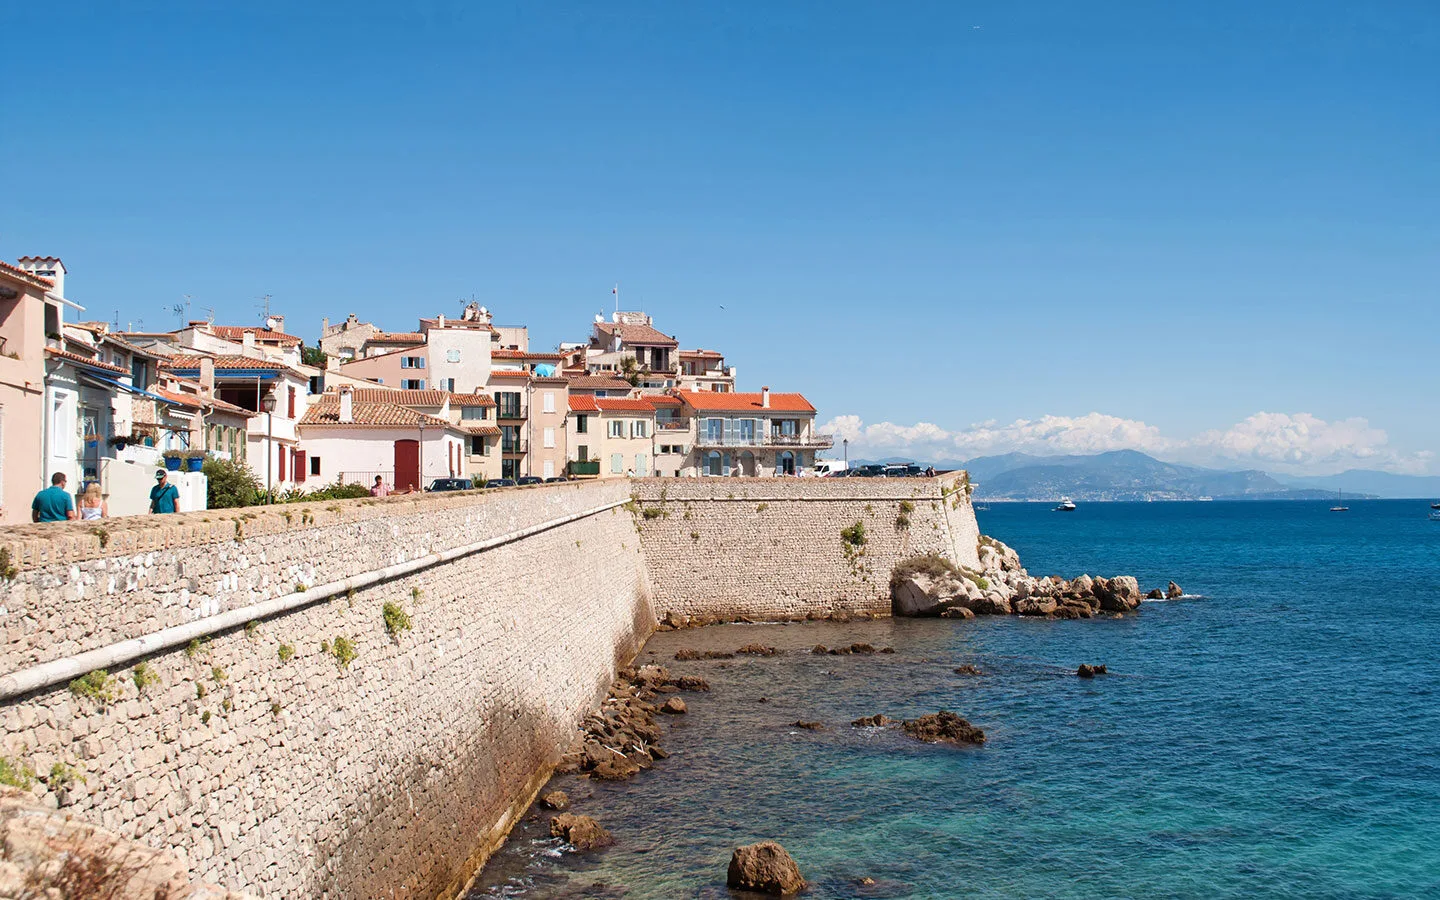 The walled town of Vieil Antibes